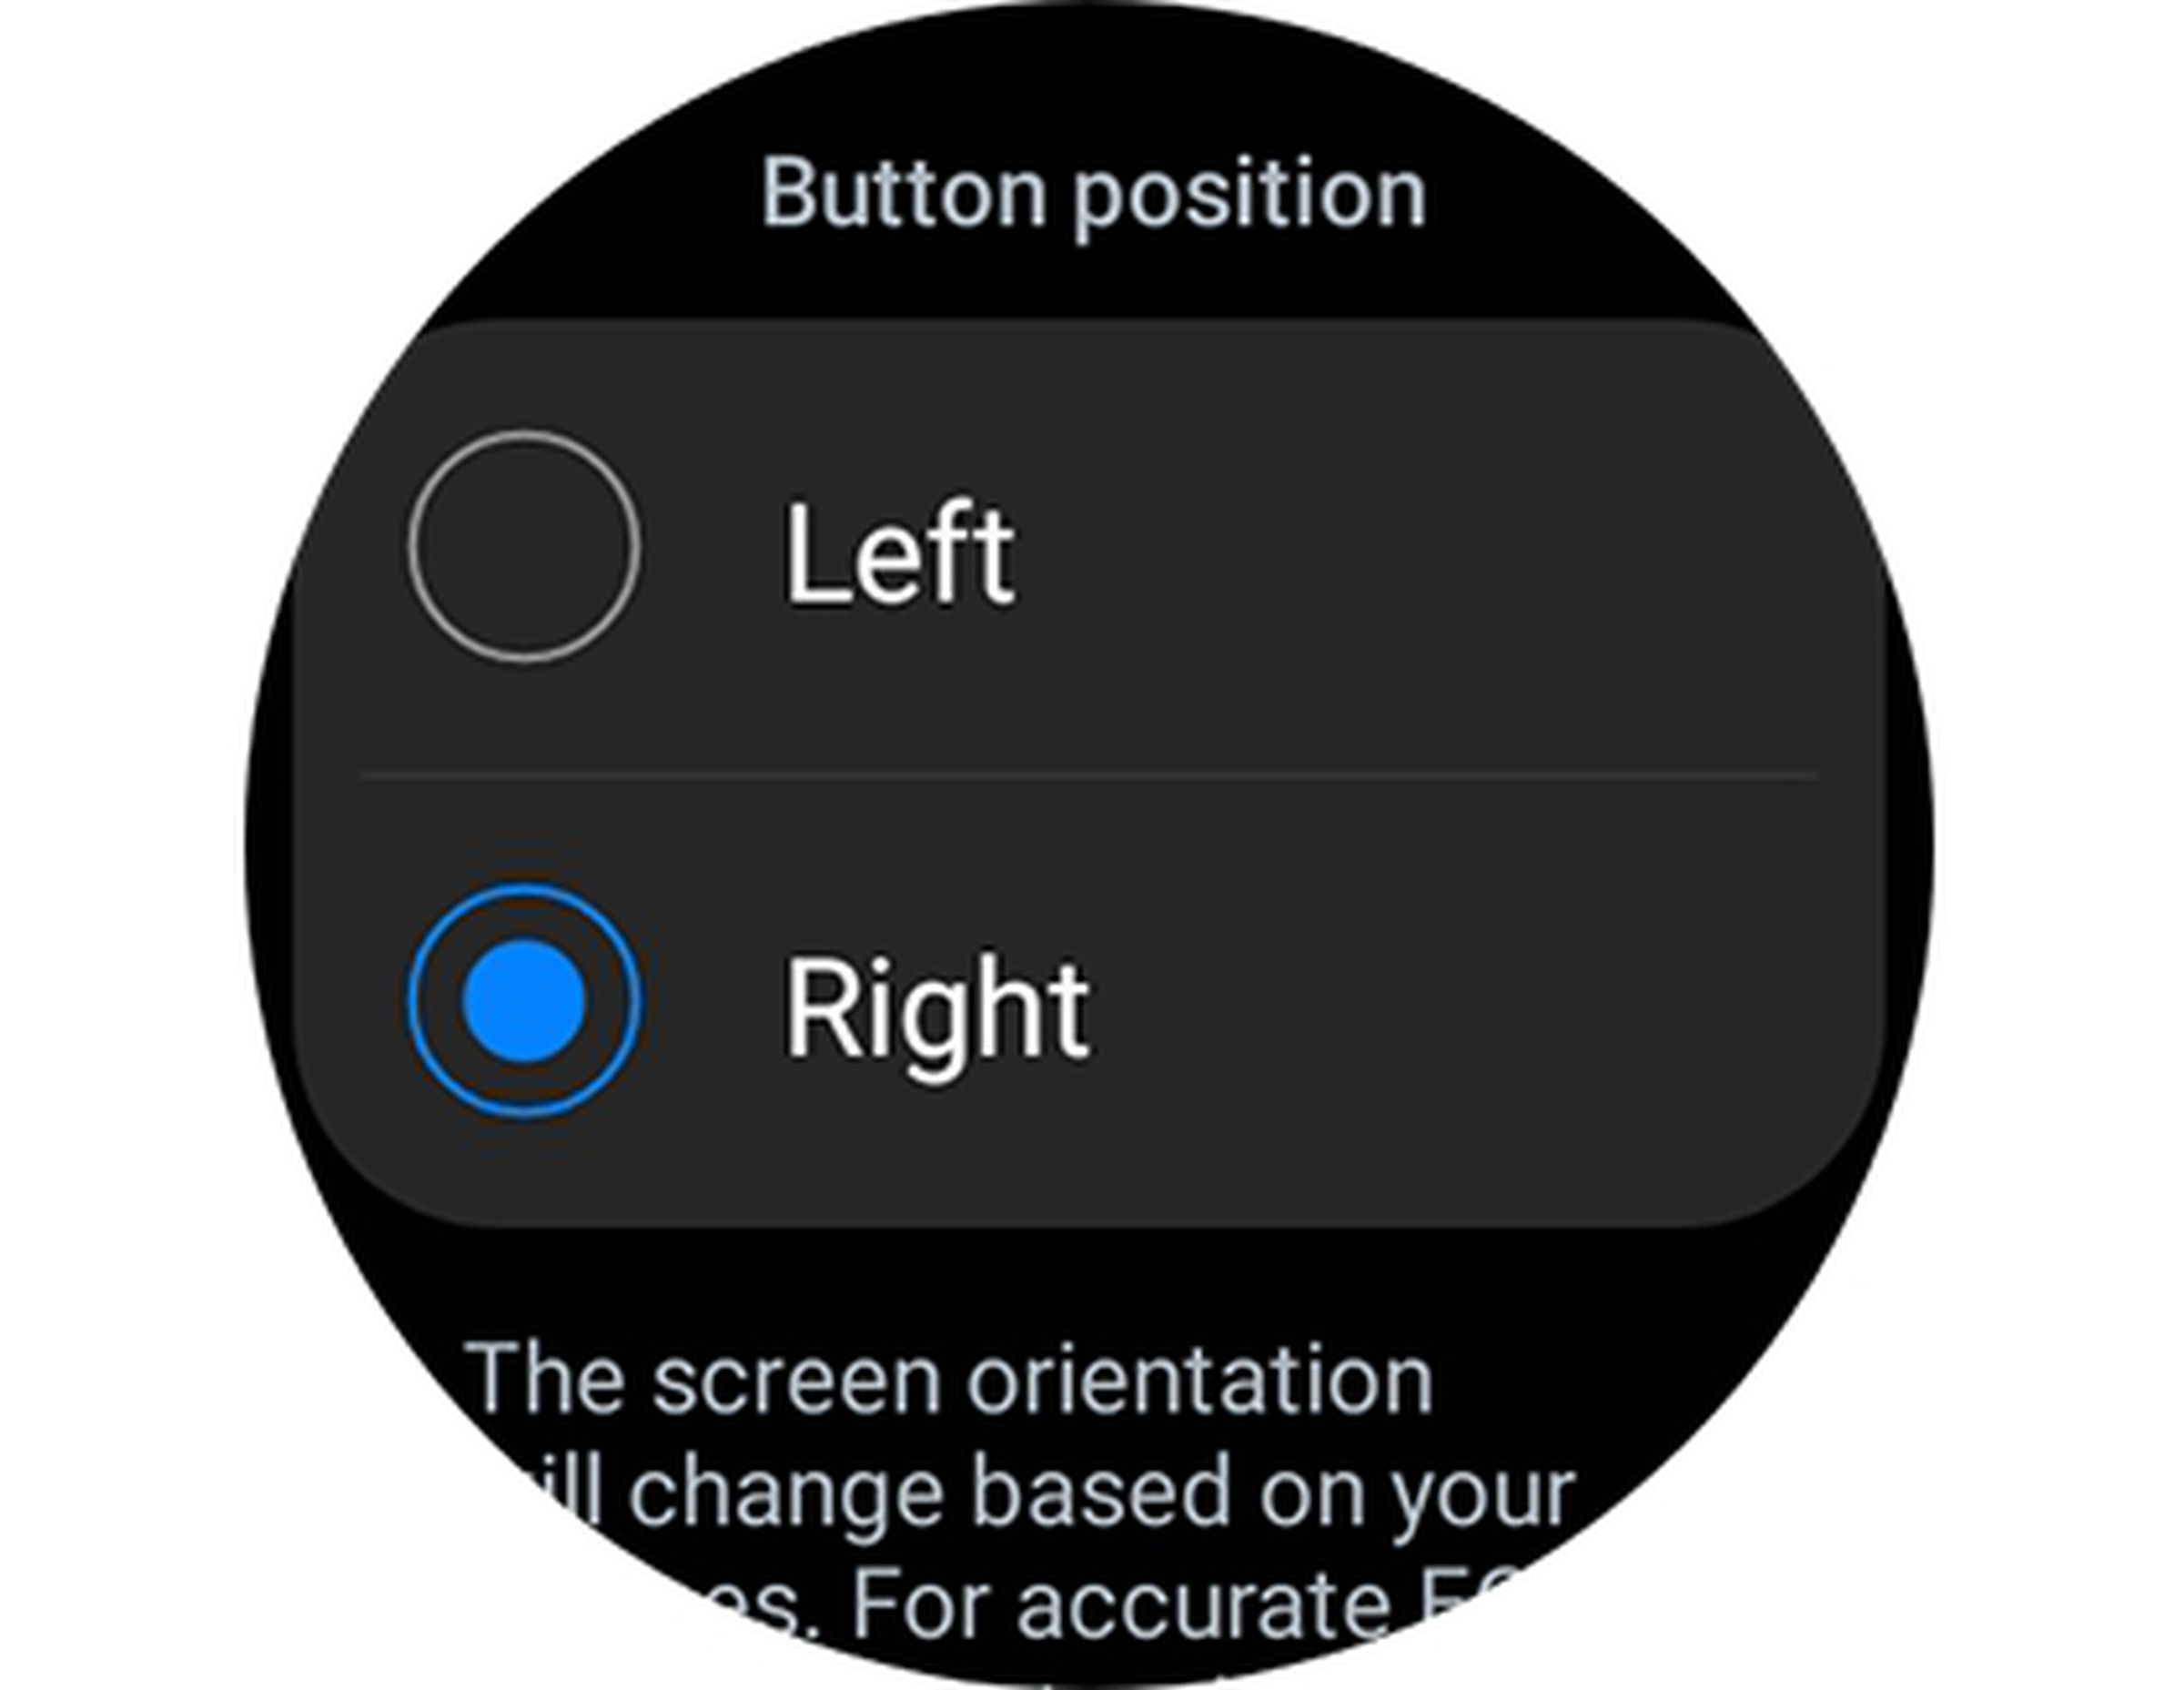 Render of the Button position menu on the Galaxy Watch 4